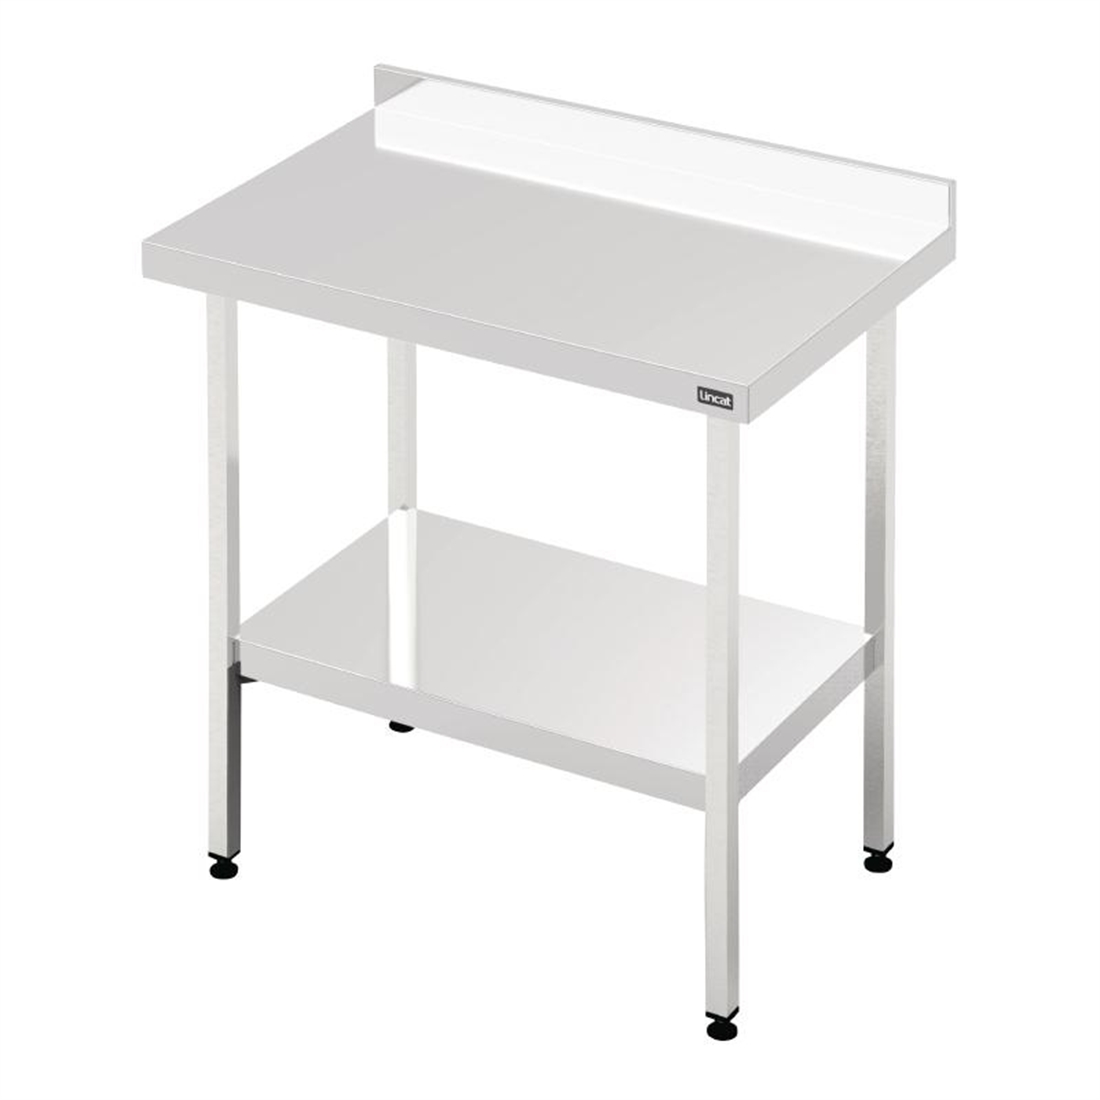 Lincat 600 Series Stainless Steel Wall Table with Undershelf 1800mm